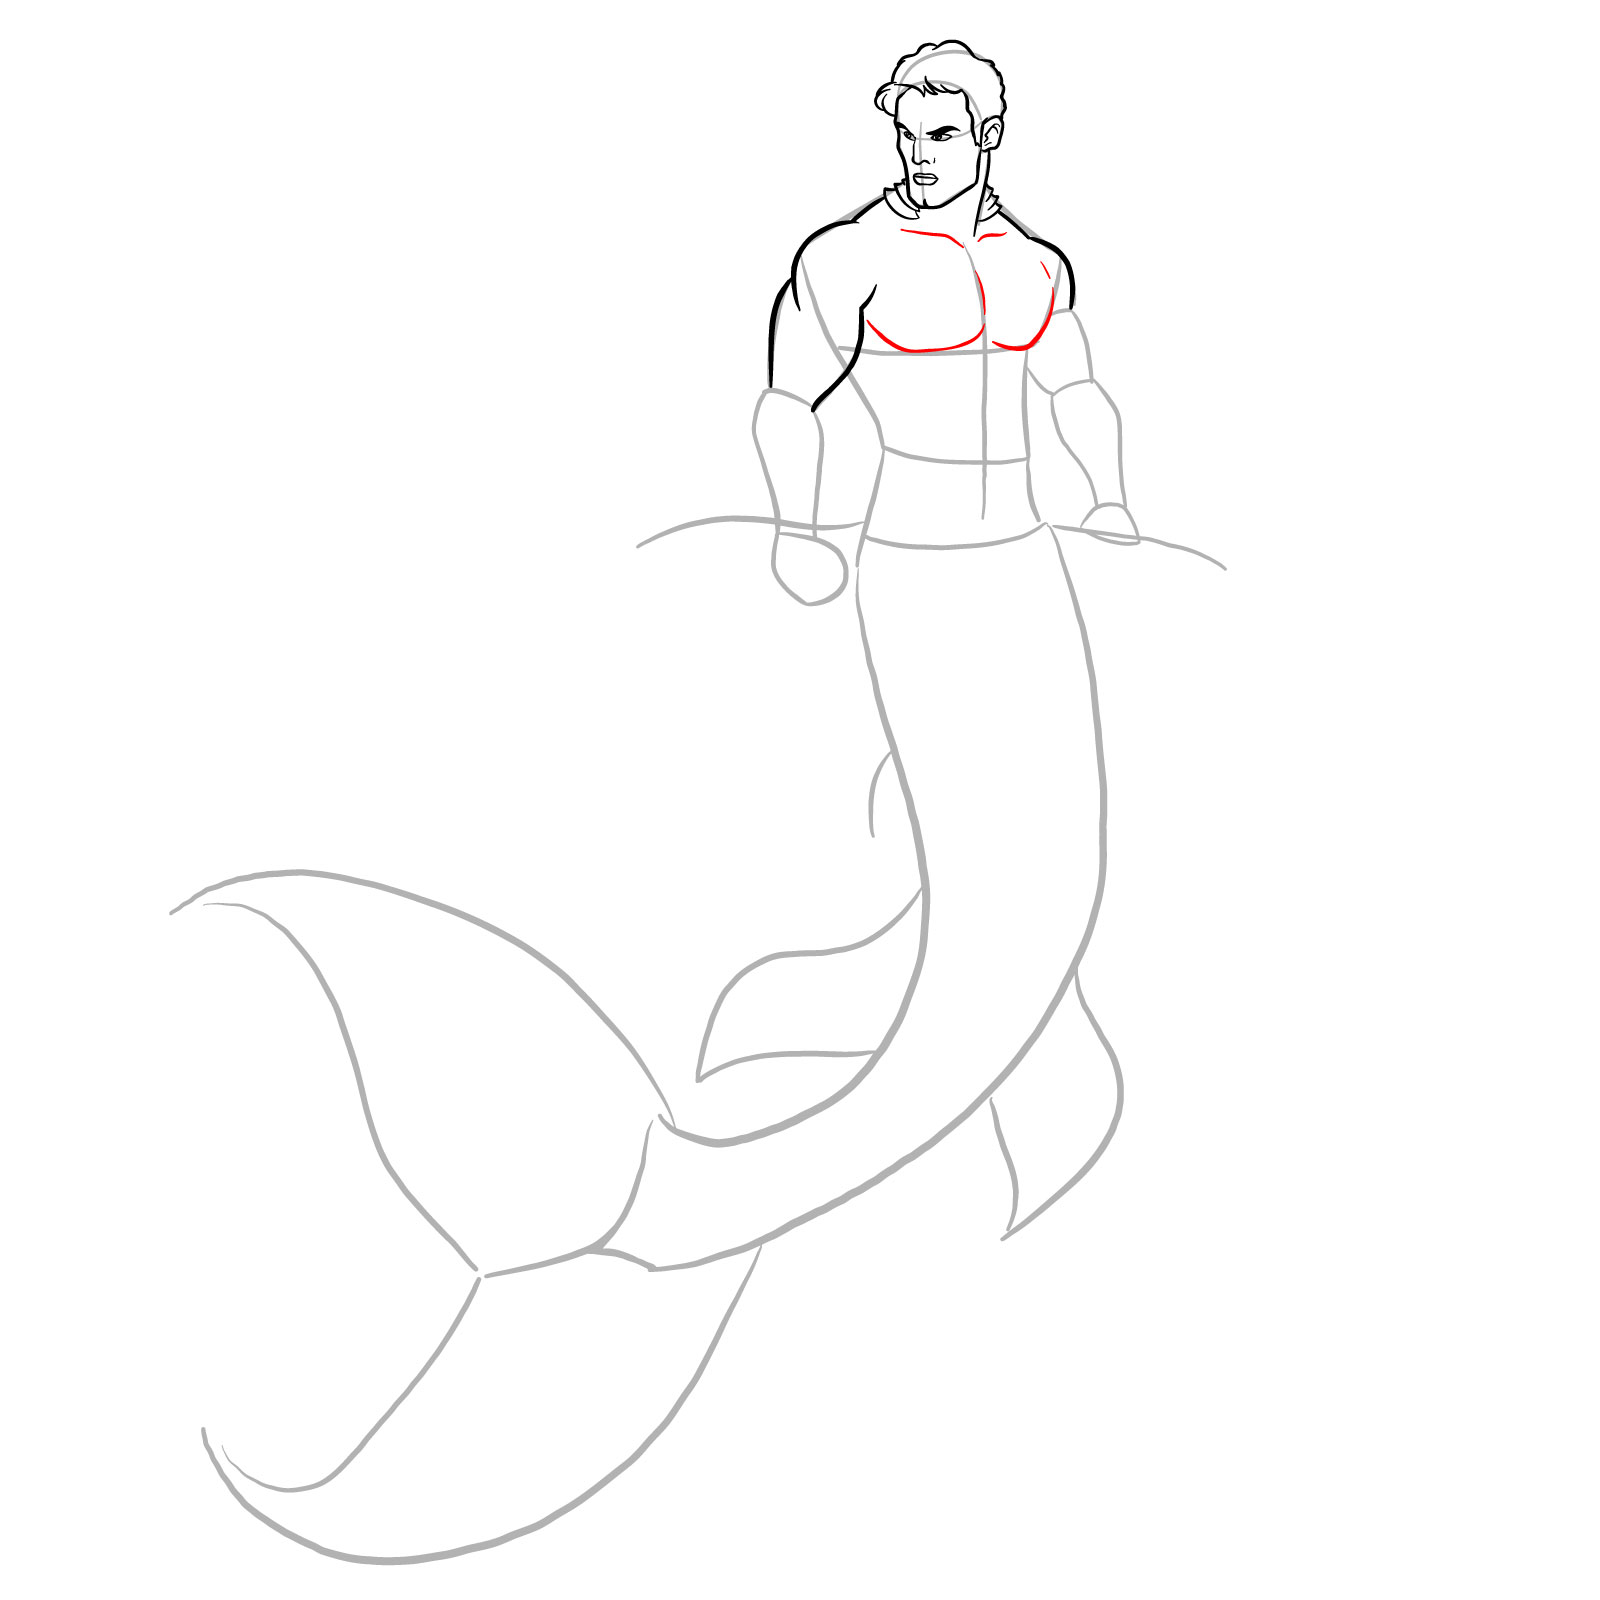 How to draw a Merman Sketchok easy drawing guides